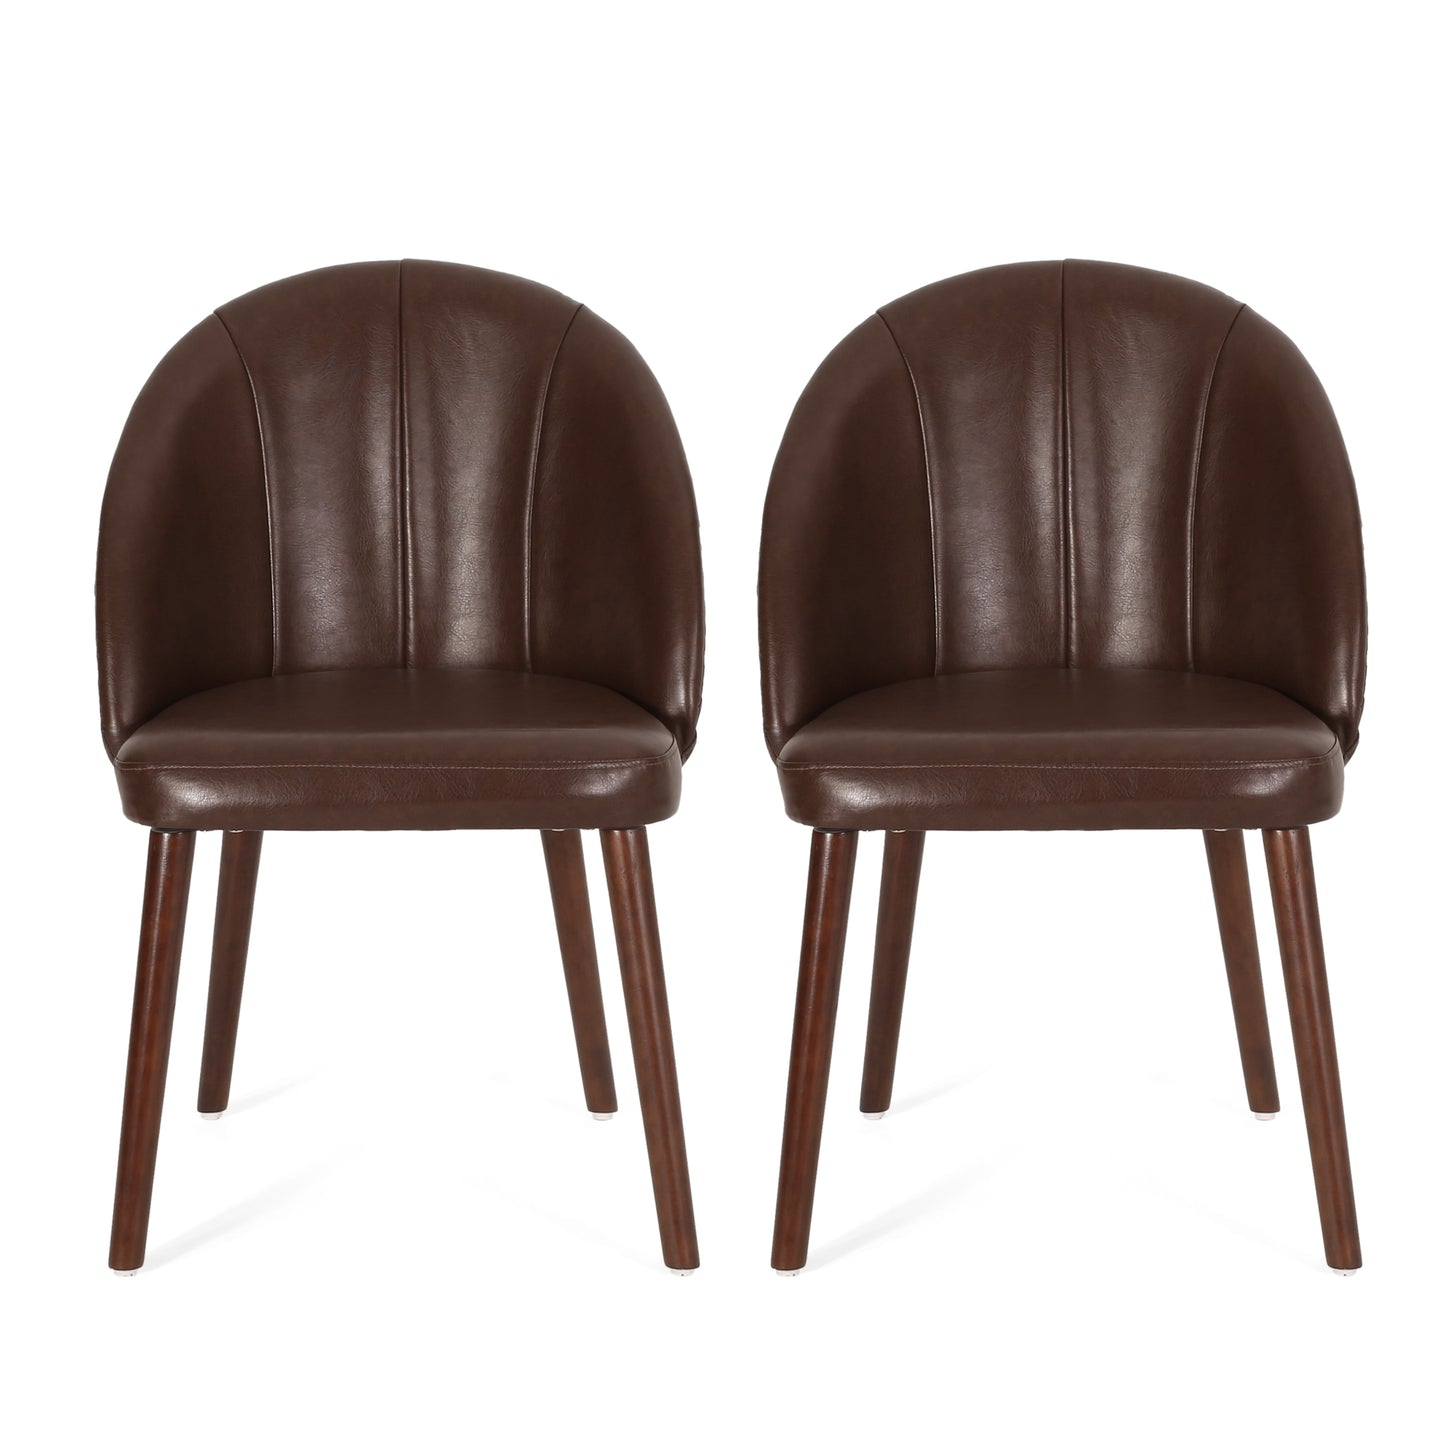 Lewiston Contemporary Channel Stitch Dining Chairs, Set of 2